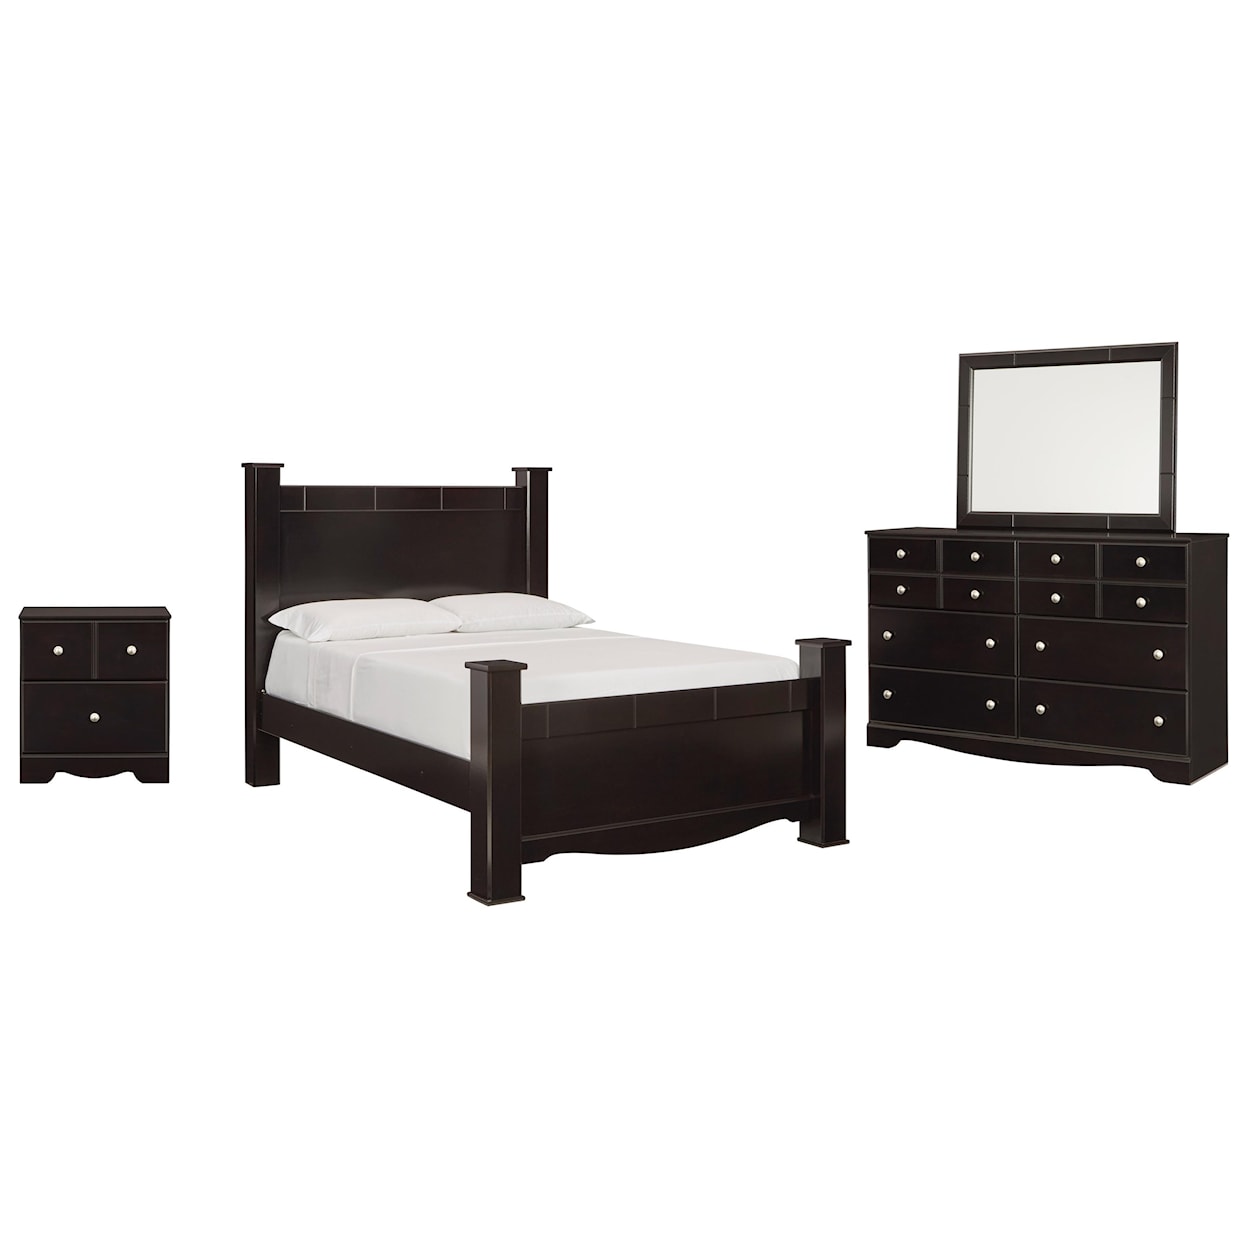 Ashley Furniture Signature Design Mirlotown East King Bed Dresser Mirror and Nightstand